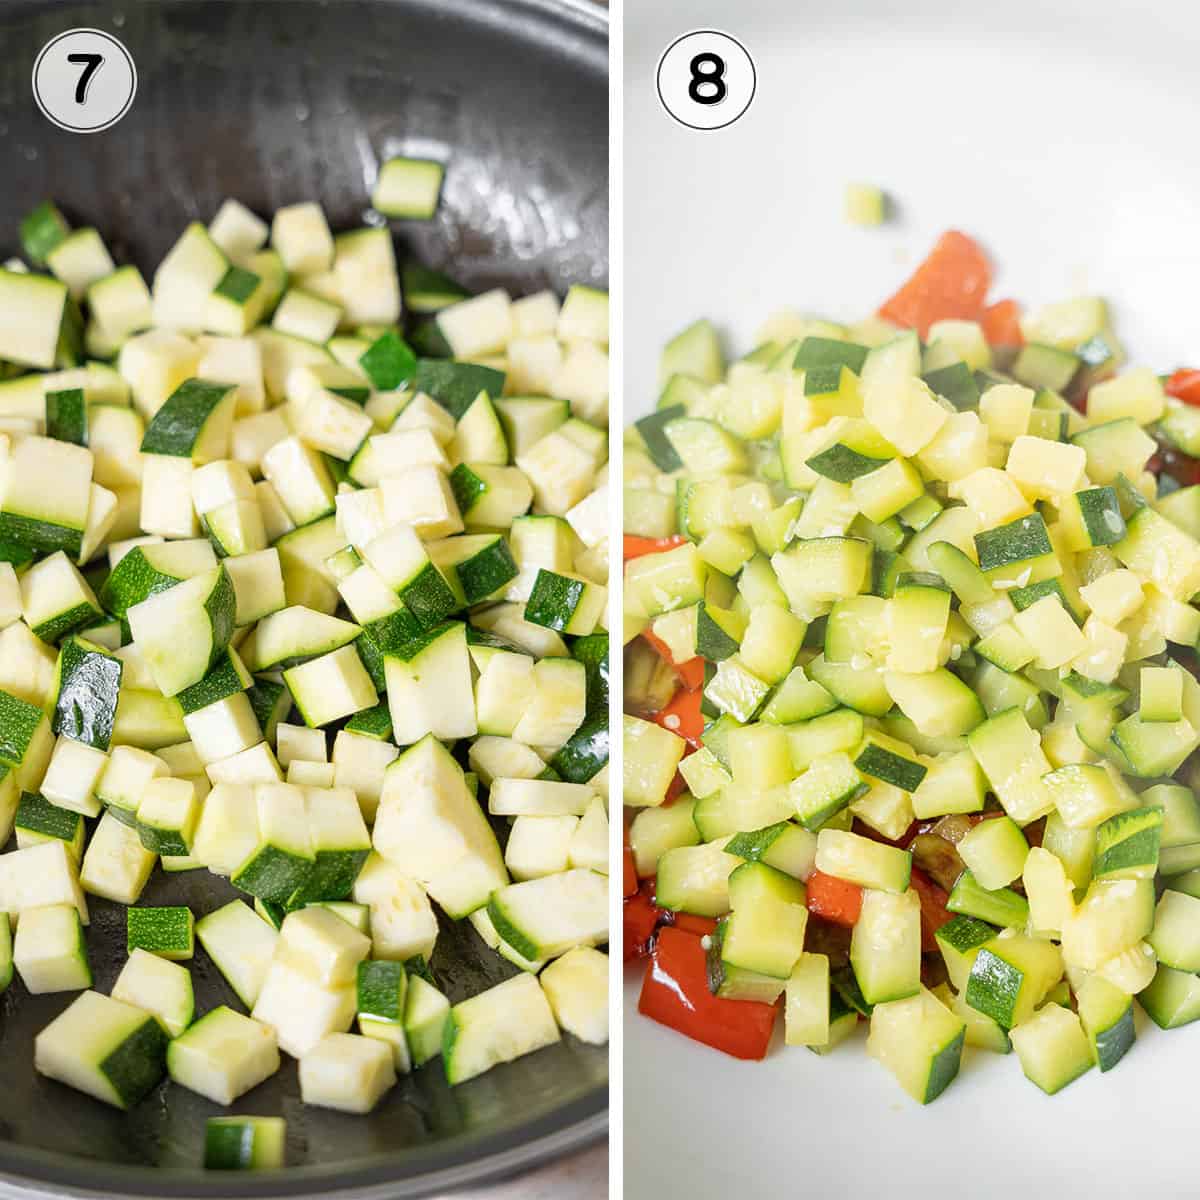 diced zucchini before and after it is cooked in a skillet.